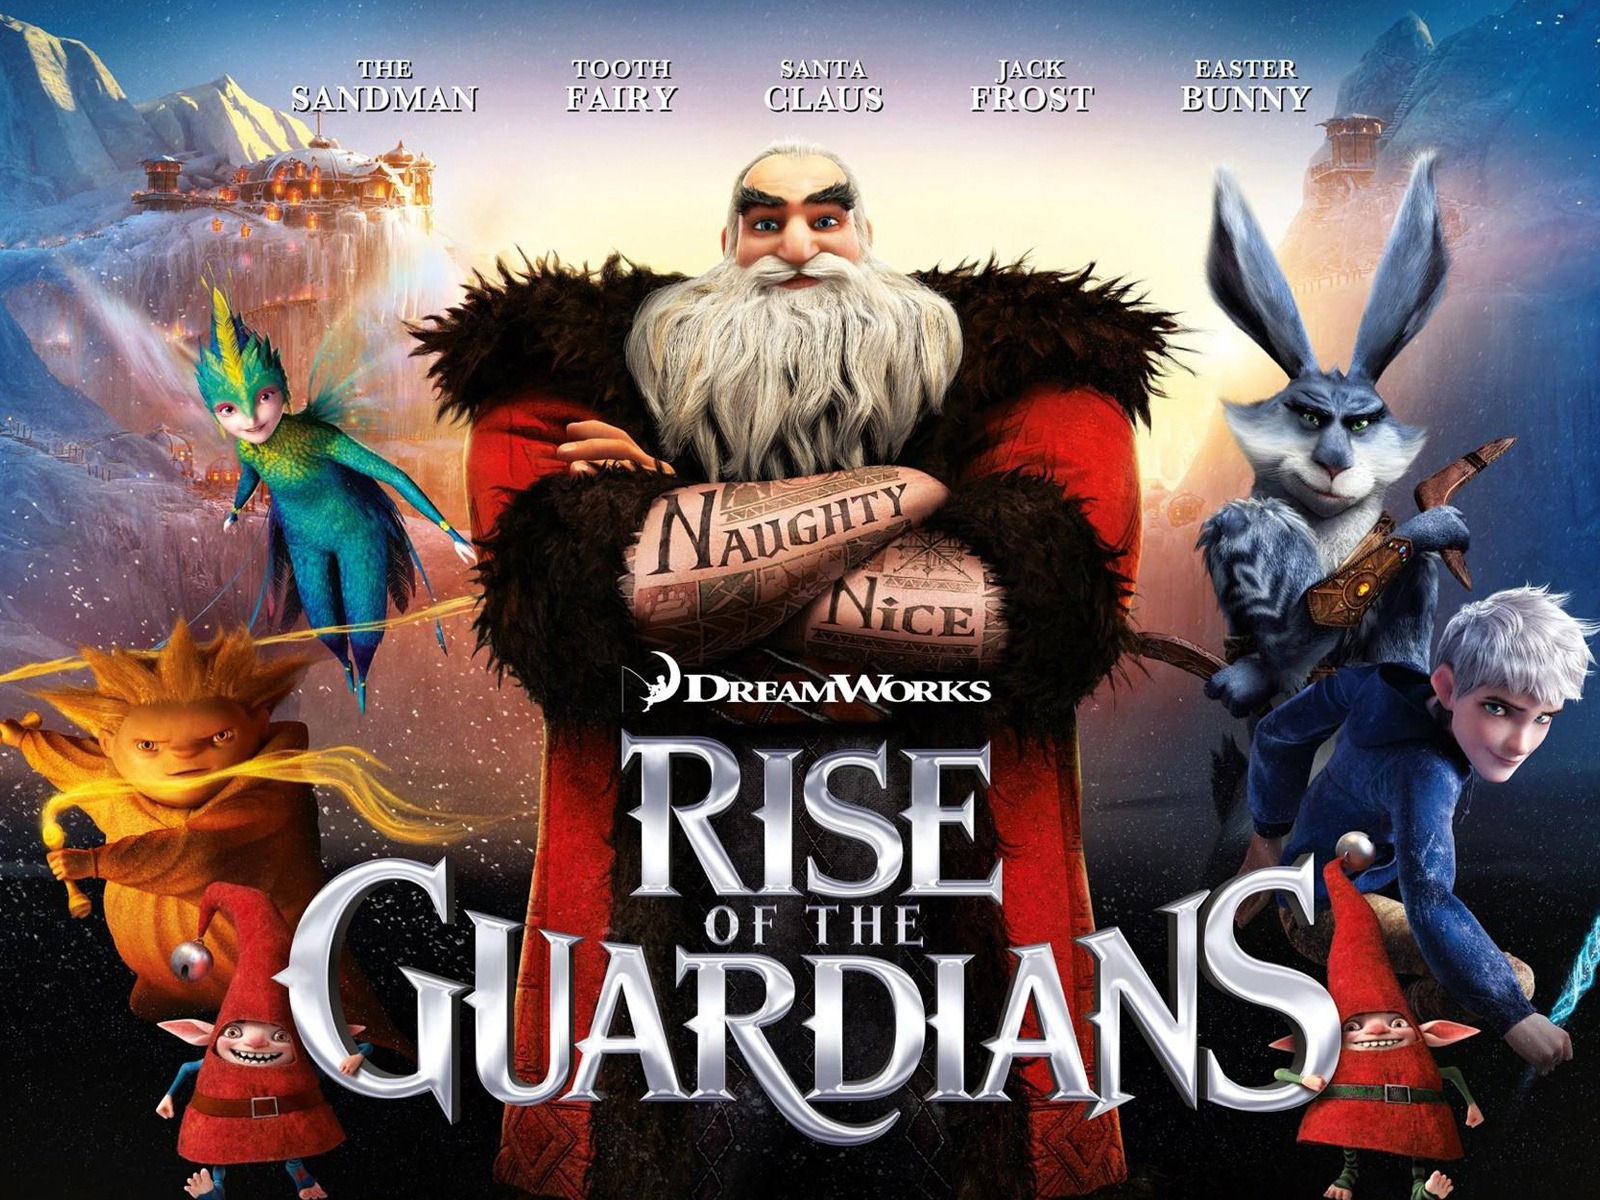 Rise of the Guardians 守護者聯盟 高清壁紙 #11 - 1600x1200